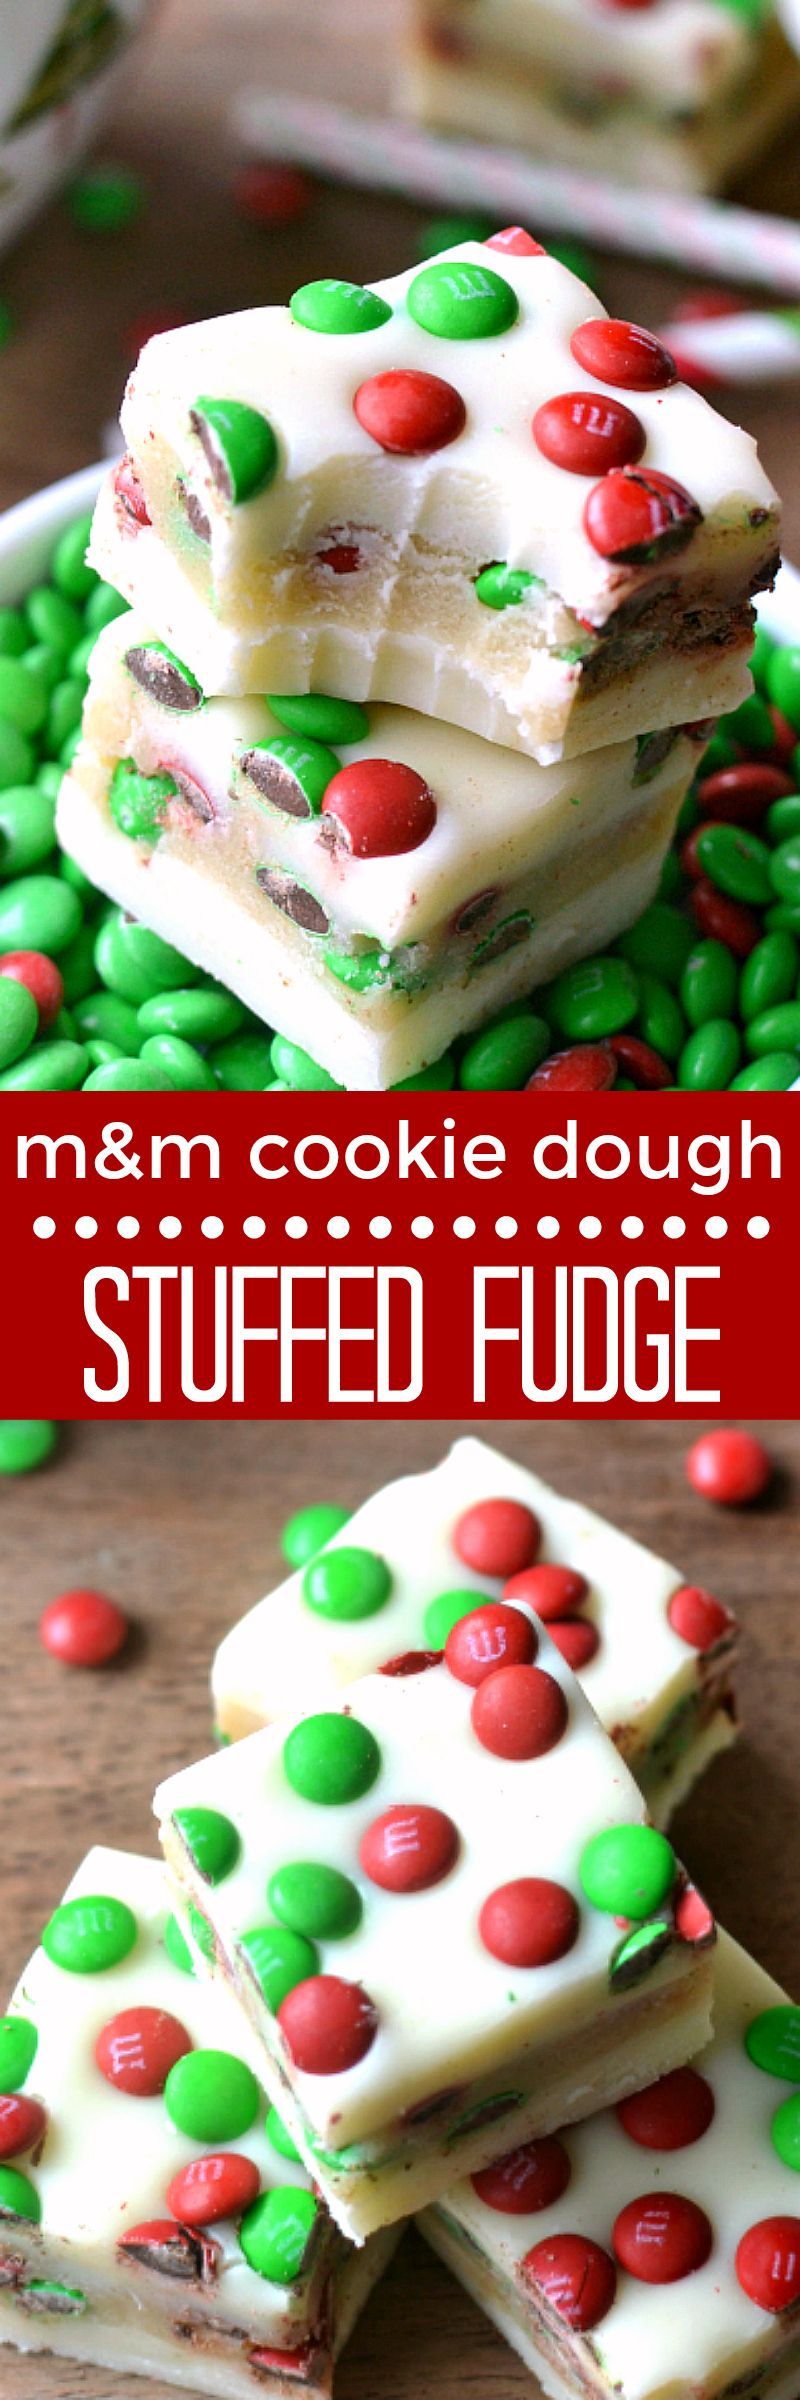 White Chocolate Fudge stuffed with M&M cookie dough and topped with more M&amp